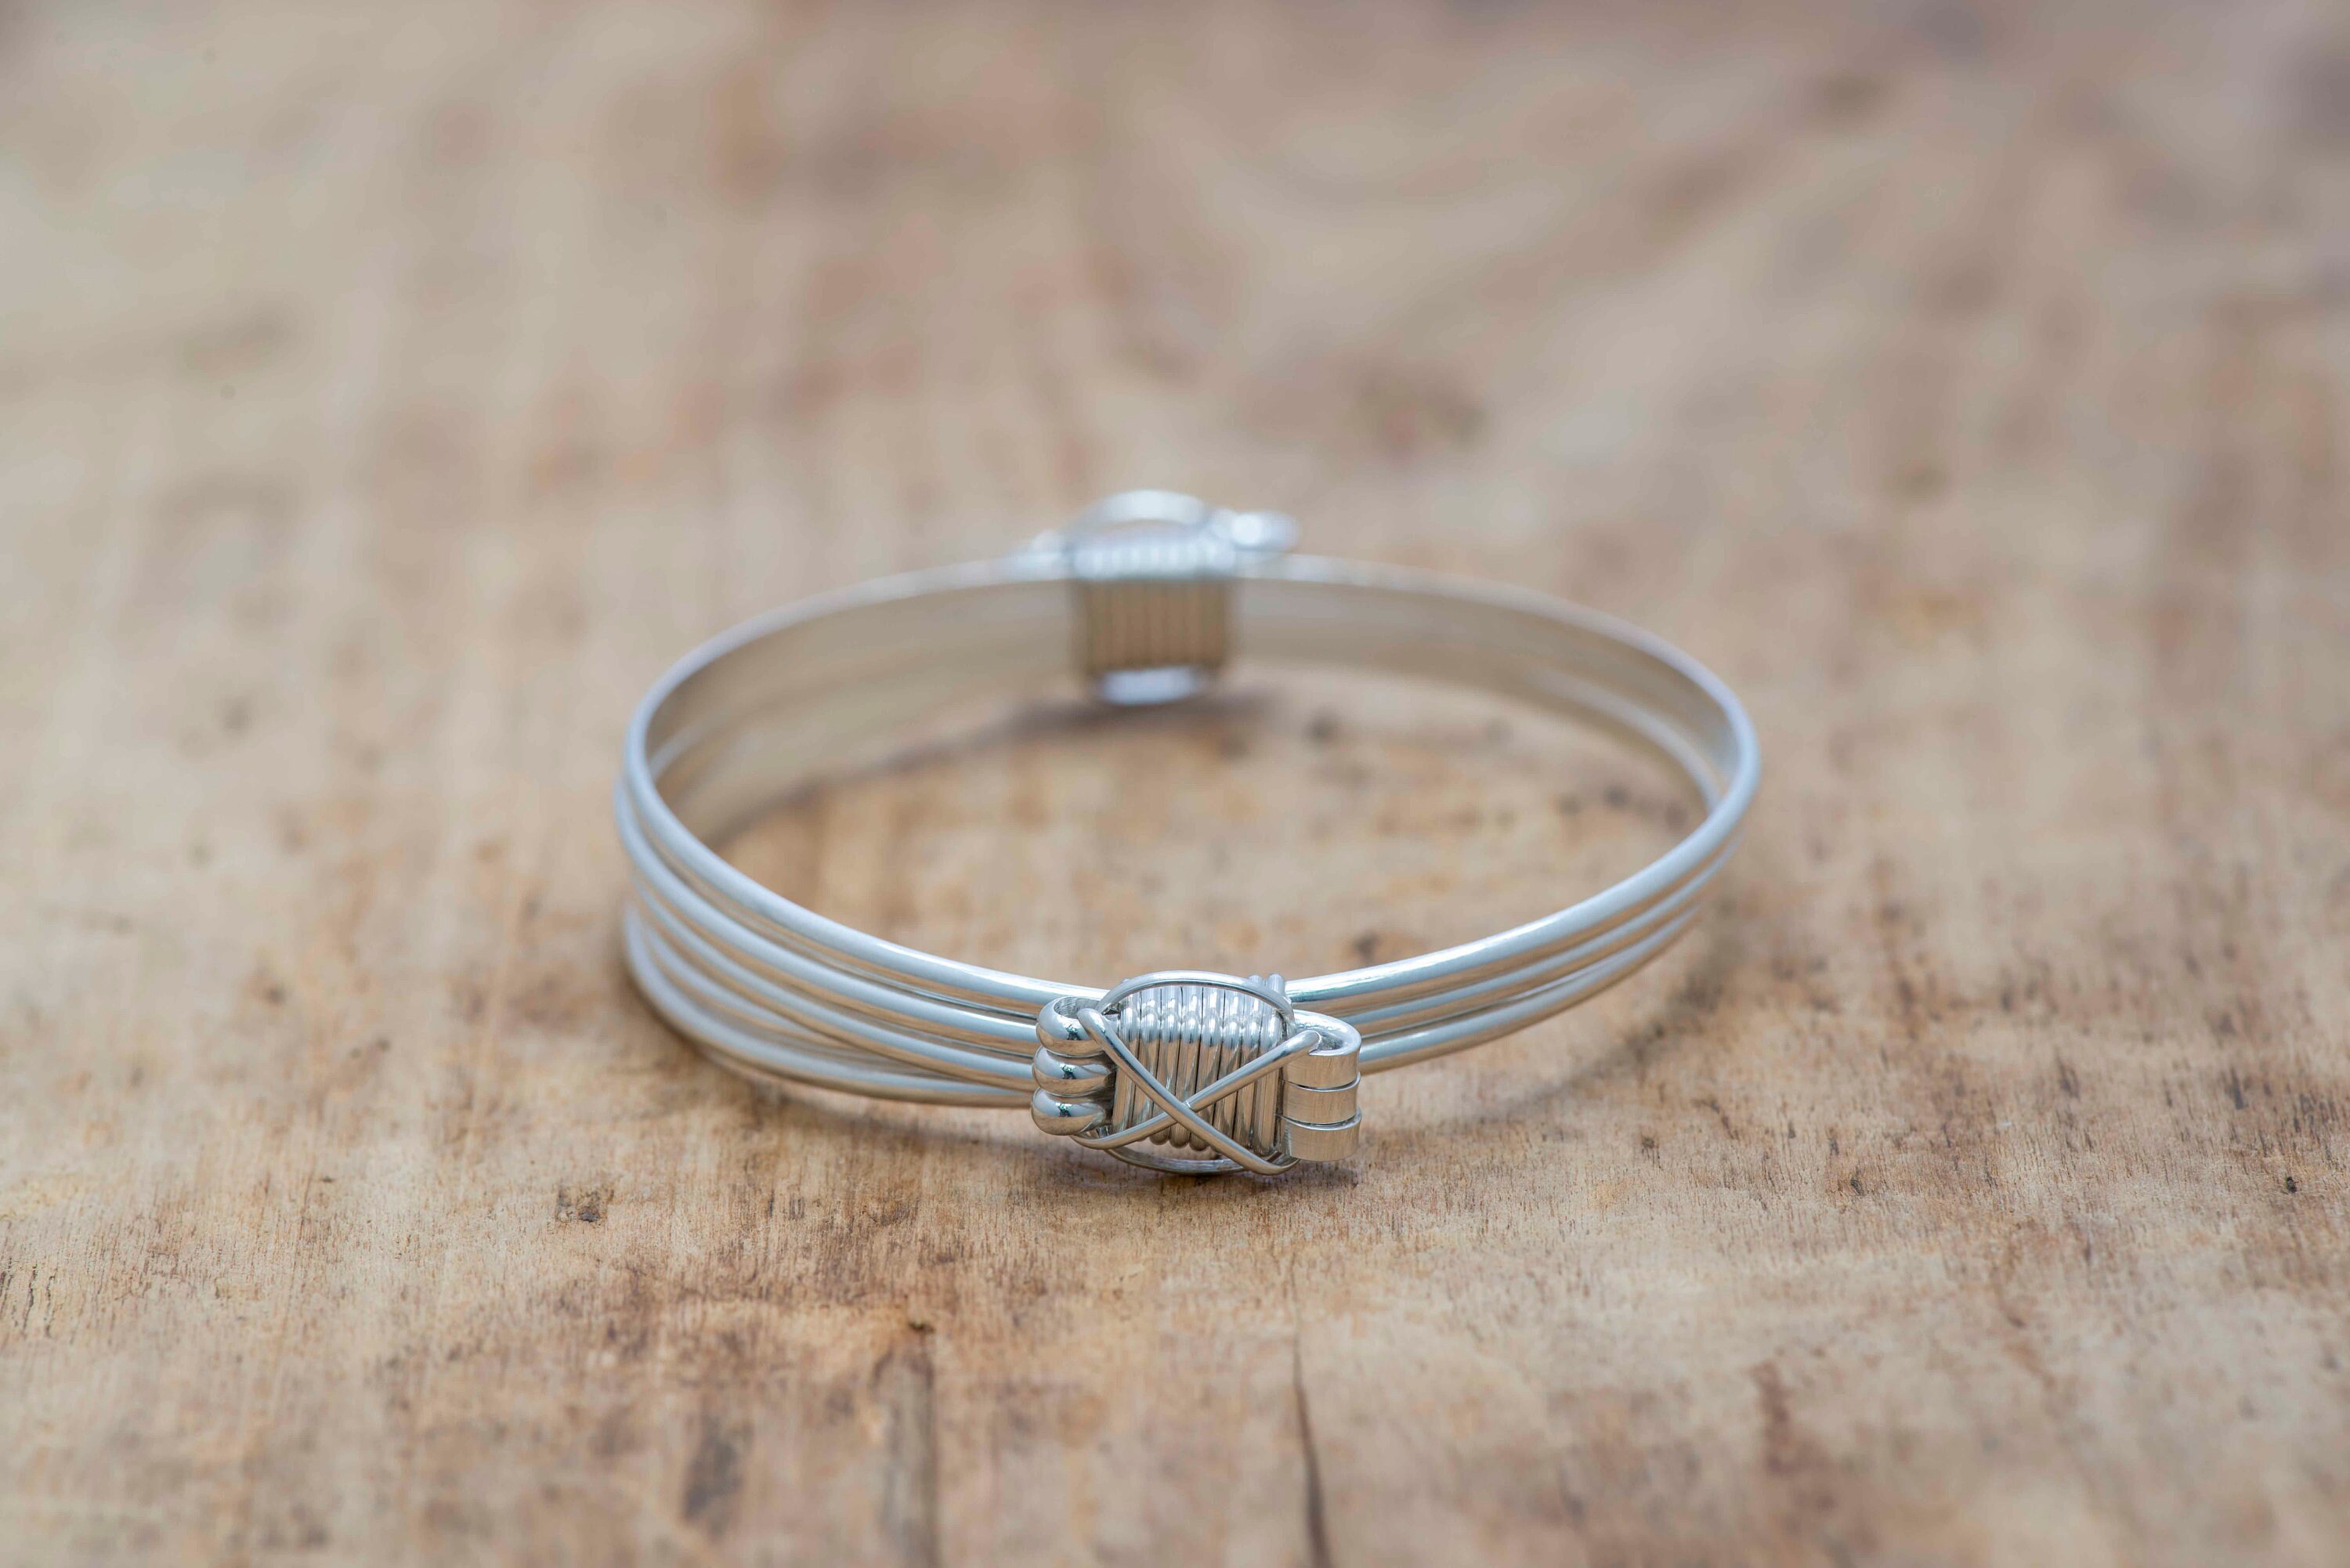 Four Knot 9 Strand Elephant Hair Bangle in Sterling Silver w/ Story Ca –  The Zuri Collection